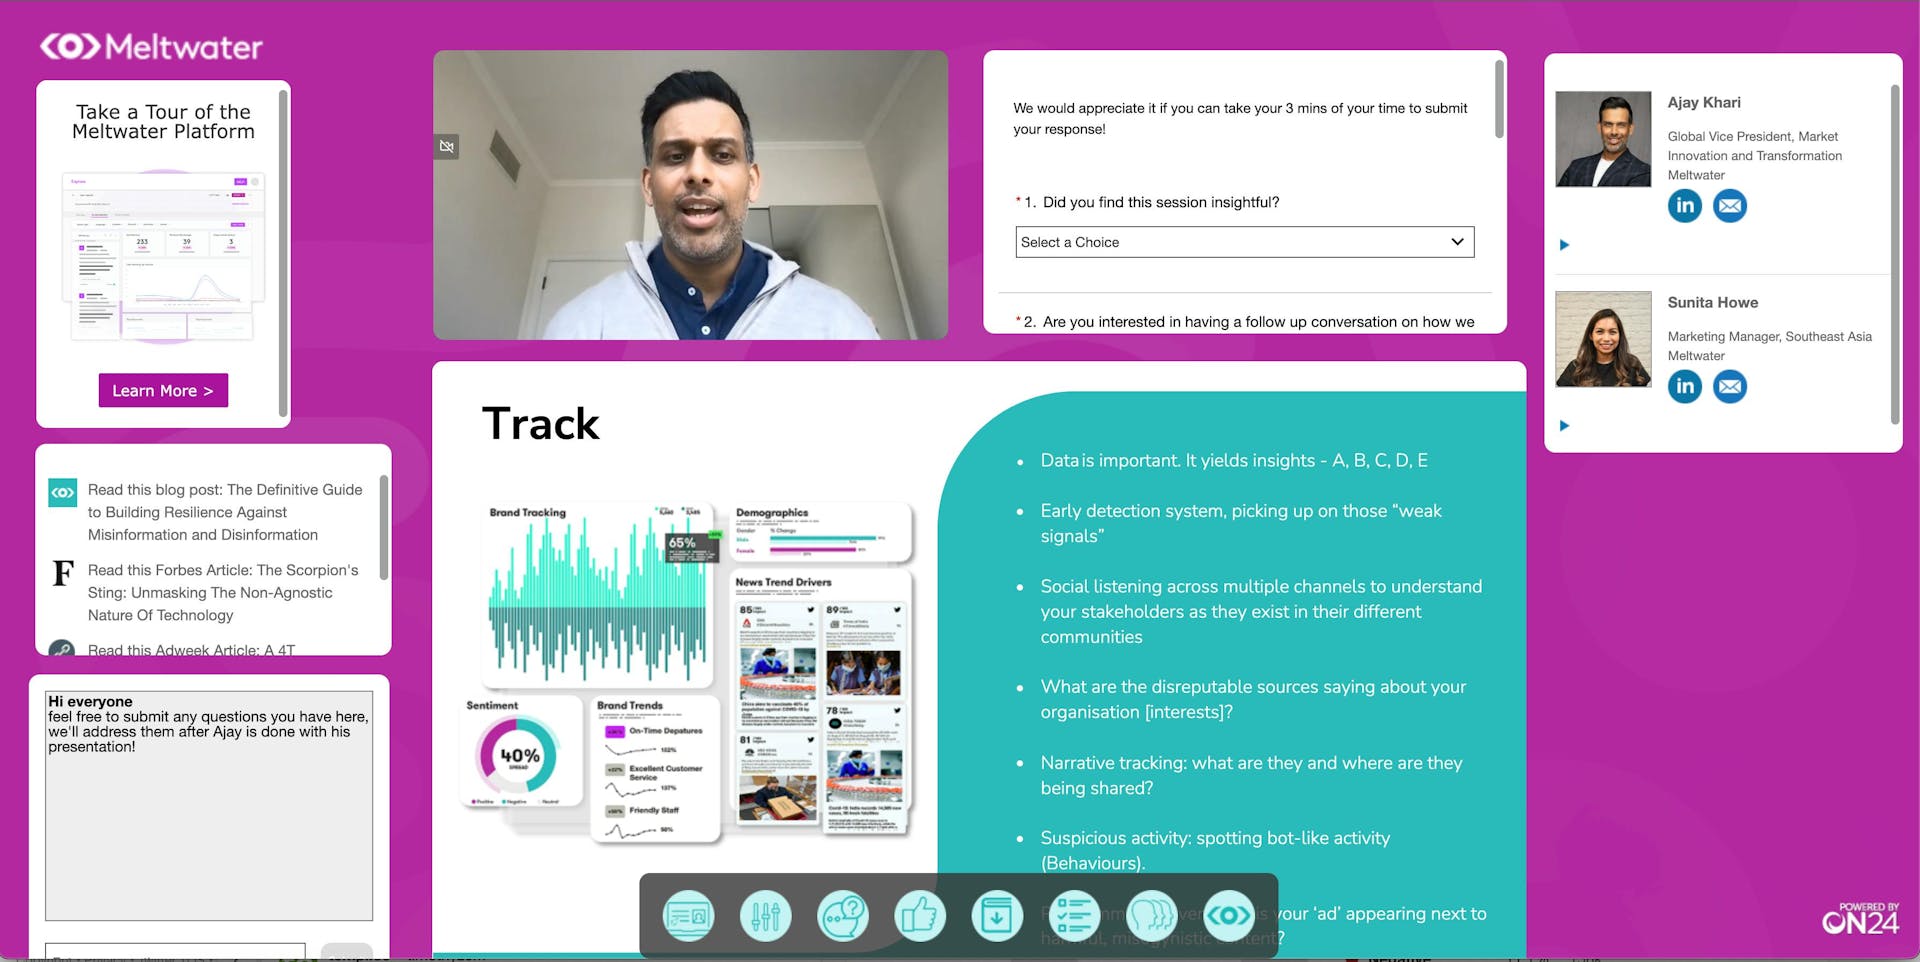 A screenshot of Ajay sharing about Track on the webinar